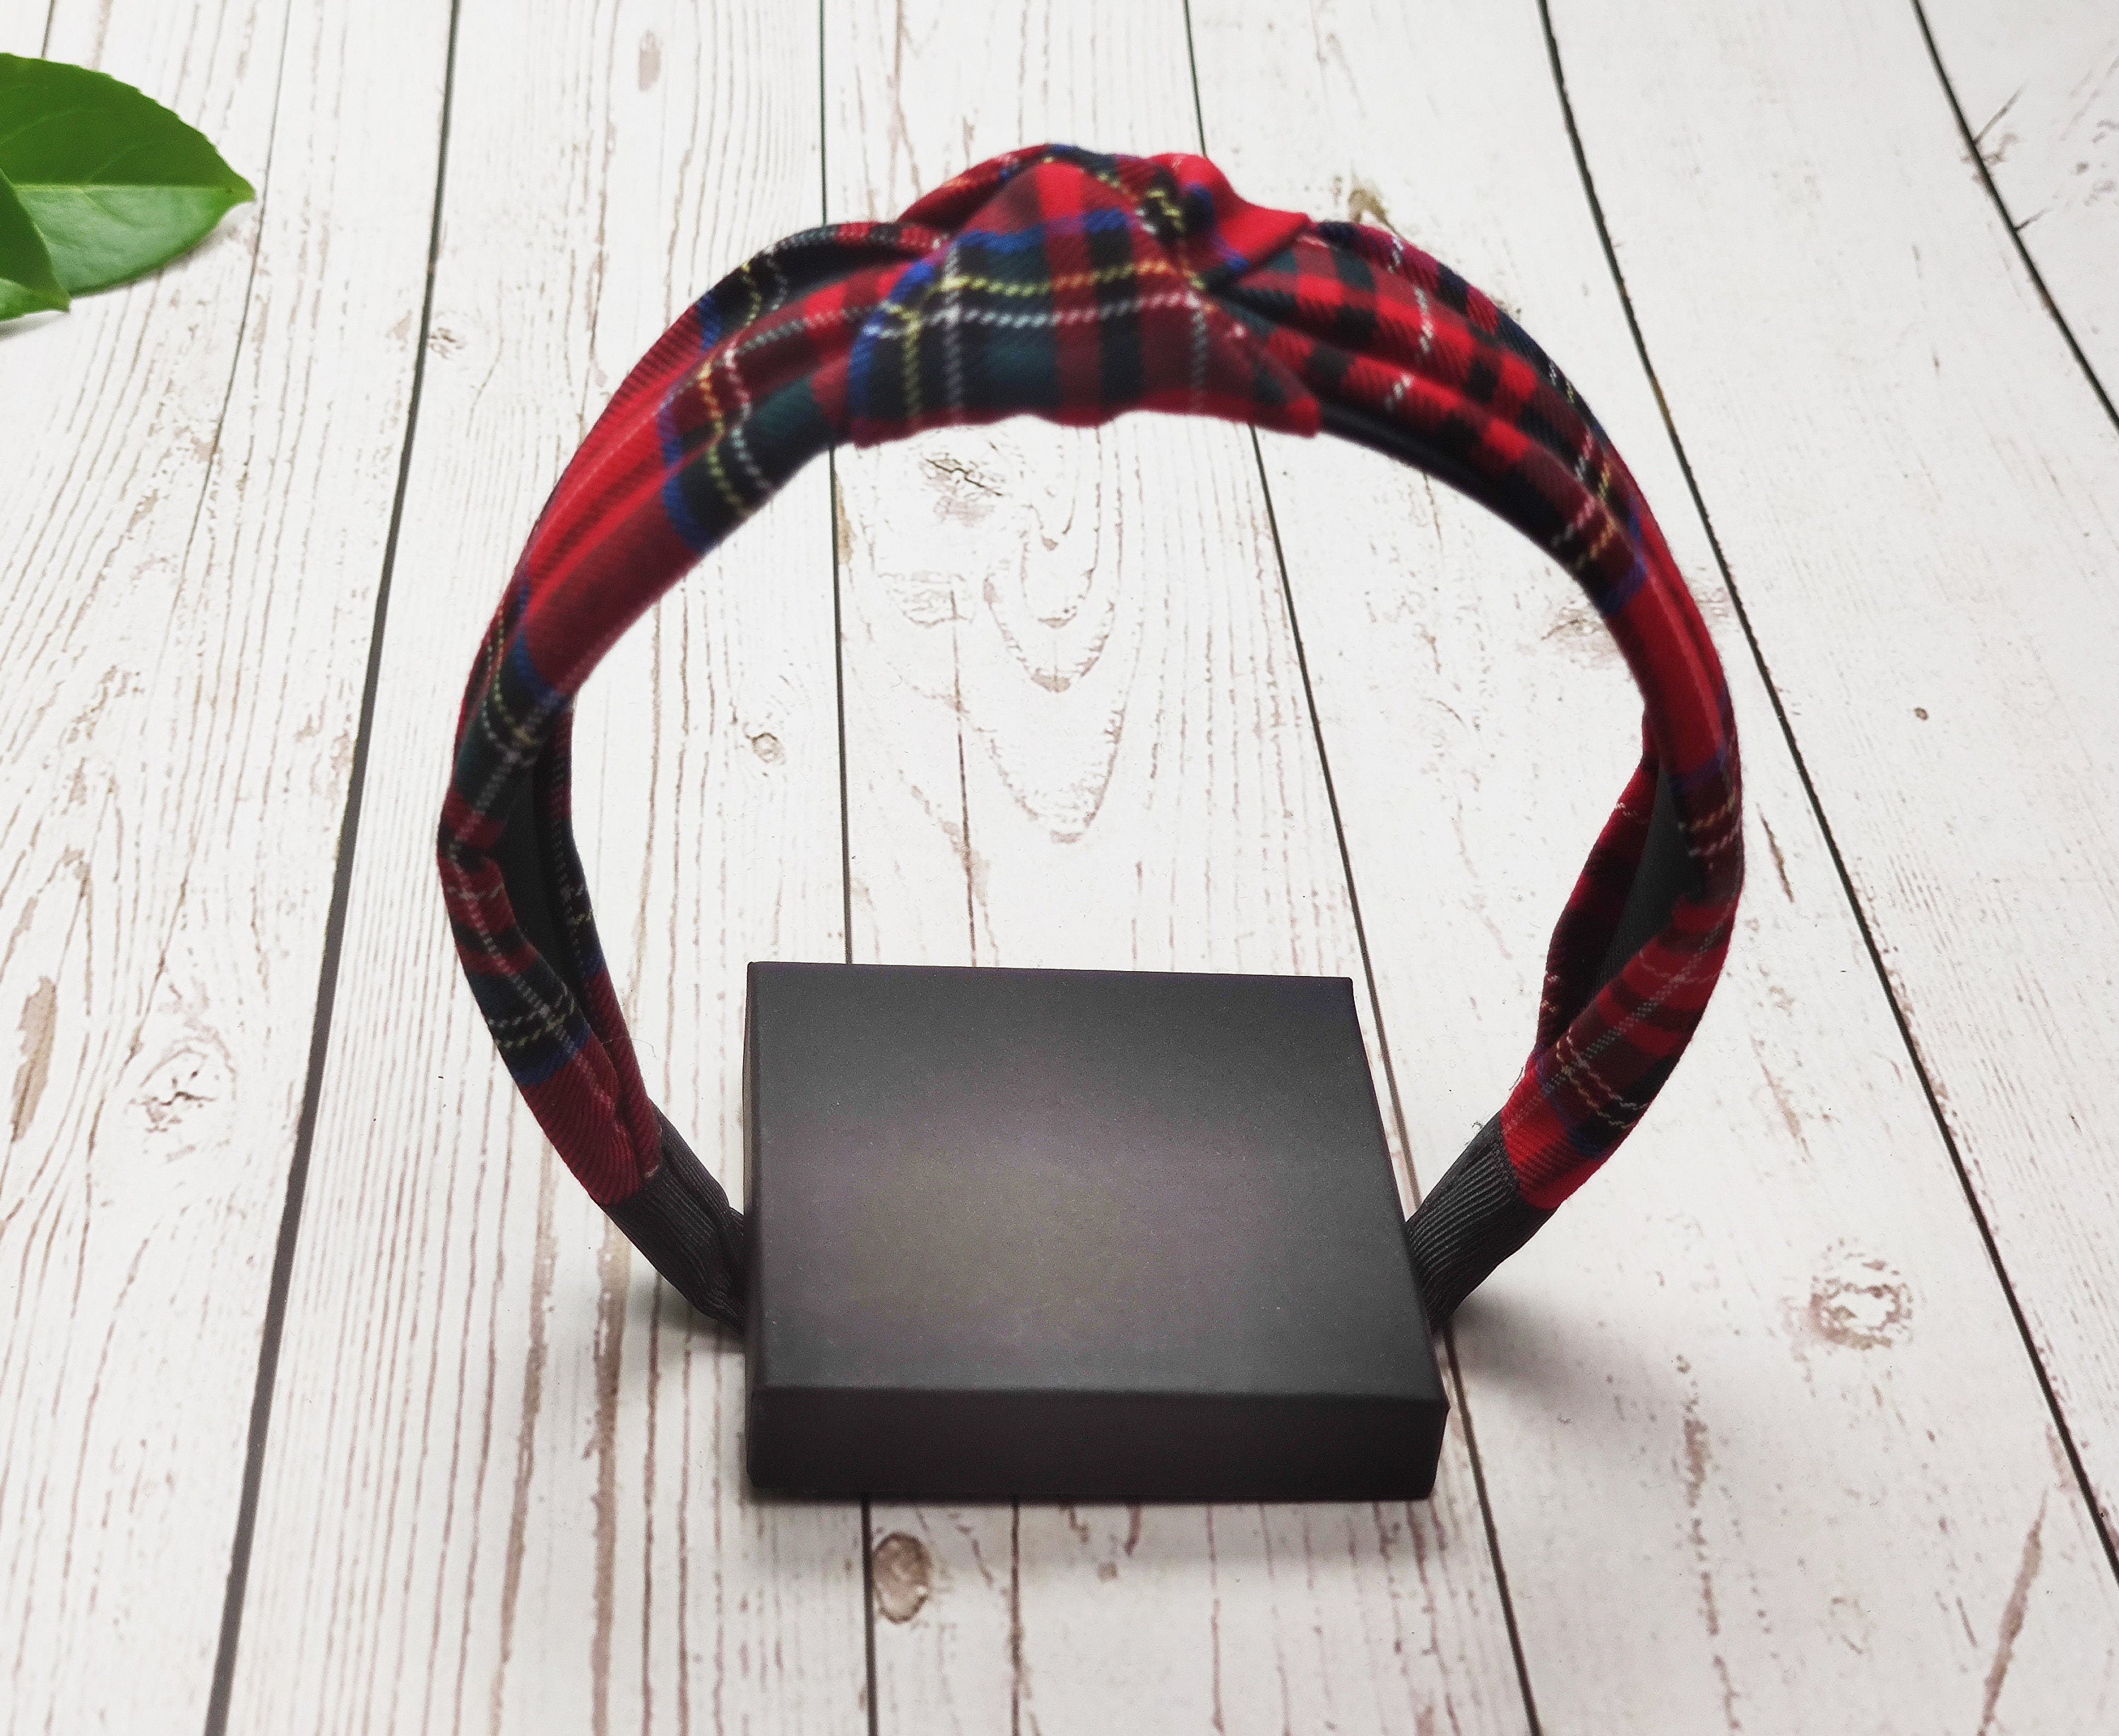 Stay comfortable and stylish all winter long with our selection of headbands for women. From cotton headbands made from soft and breathable materials to gingham headbands featuring cheerful polka dots, we have something for everyone!